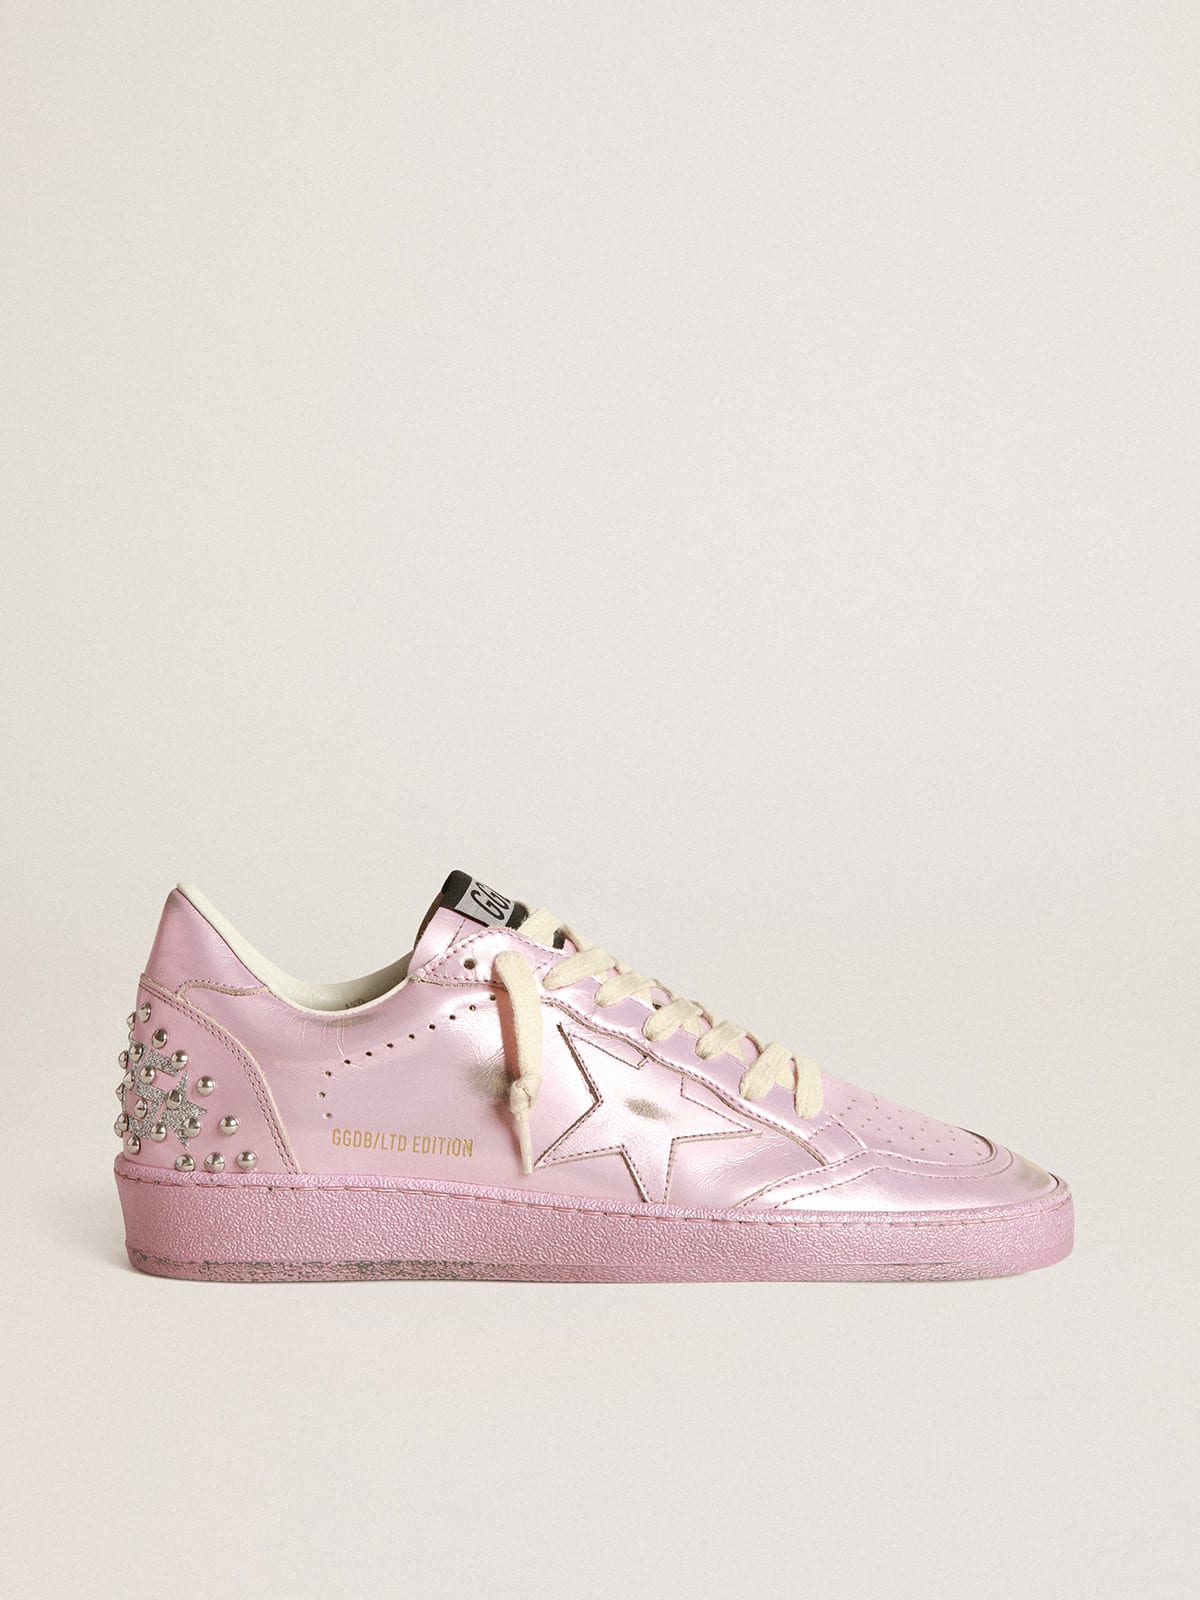 Golden Goose - Women’s Ball Star LAB in pink laminated leather with studs in 